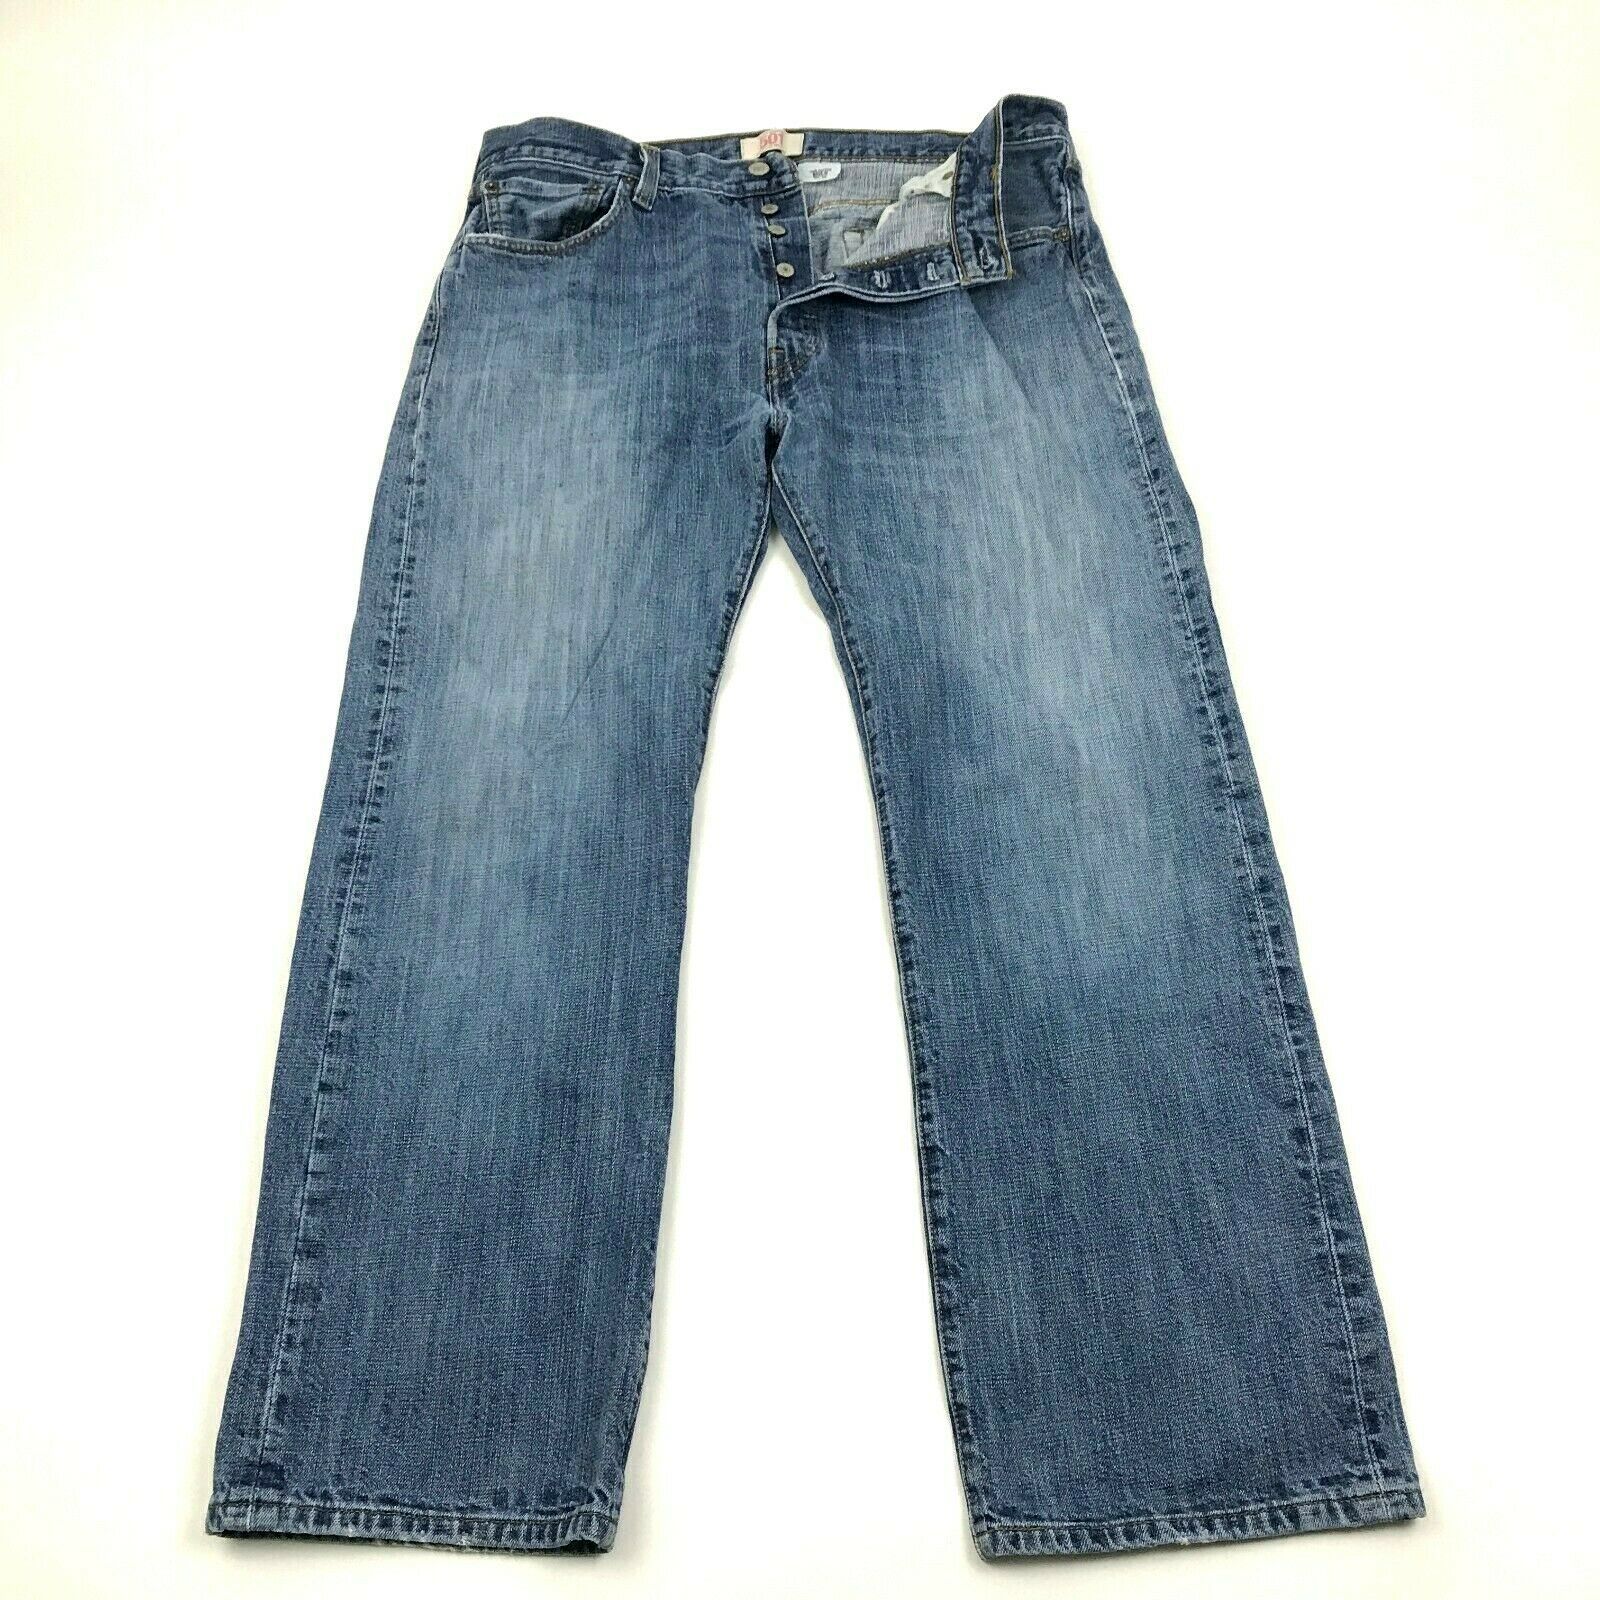 VINTAGE Levi's 501 Button Fly Jeans Size 36x30 Straight Fit Distressed ...